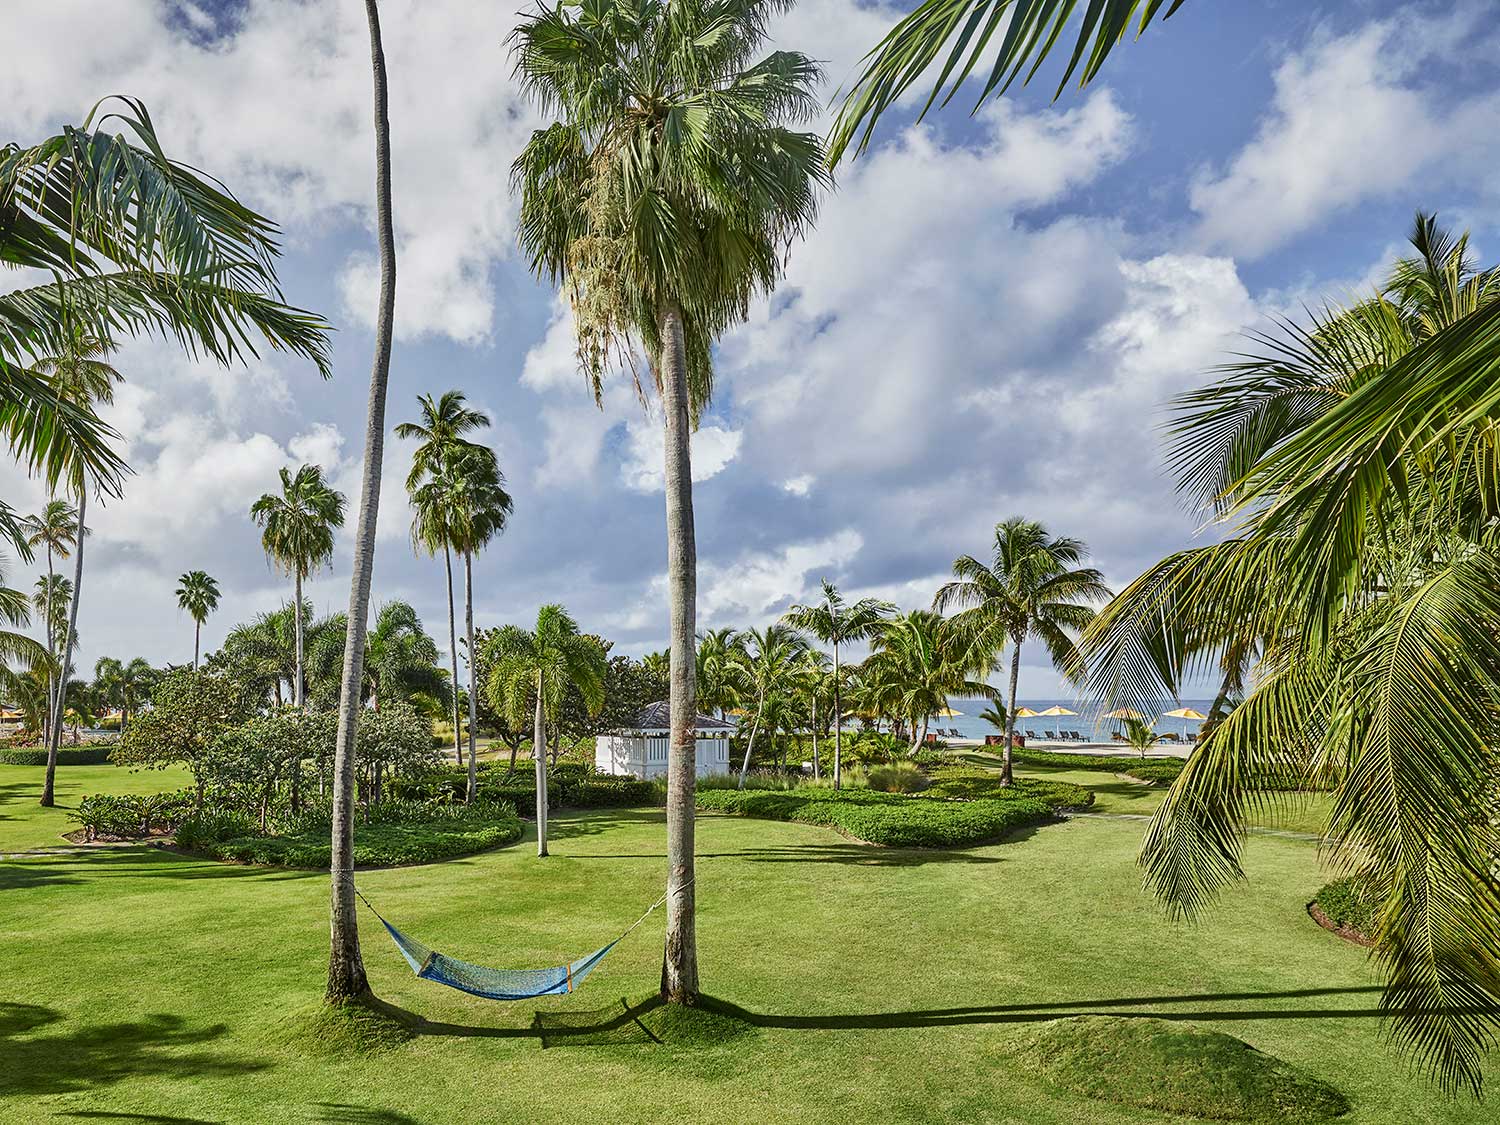 The sprawling green and palms of the Four Seasons resort.